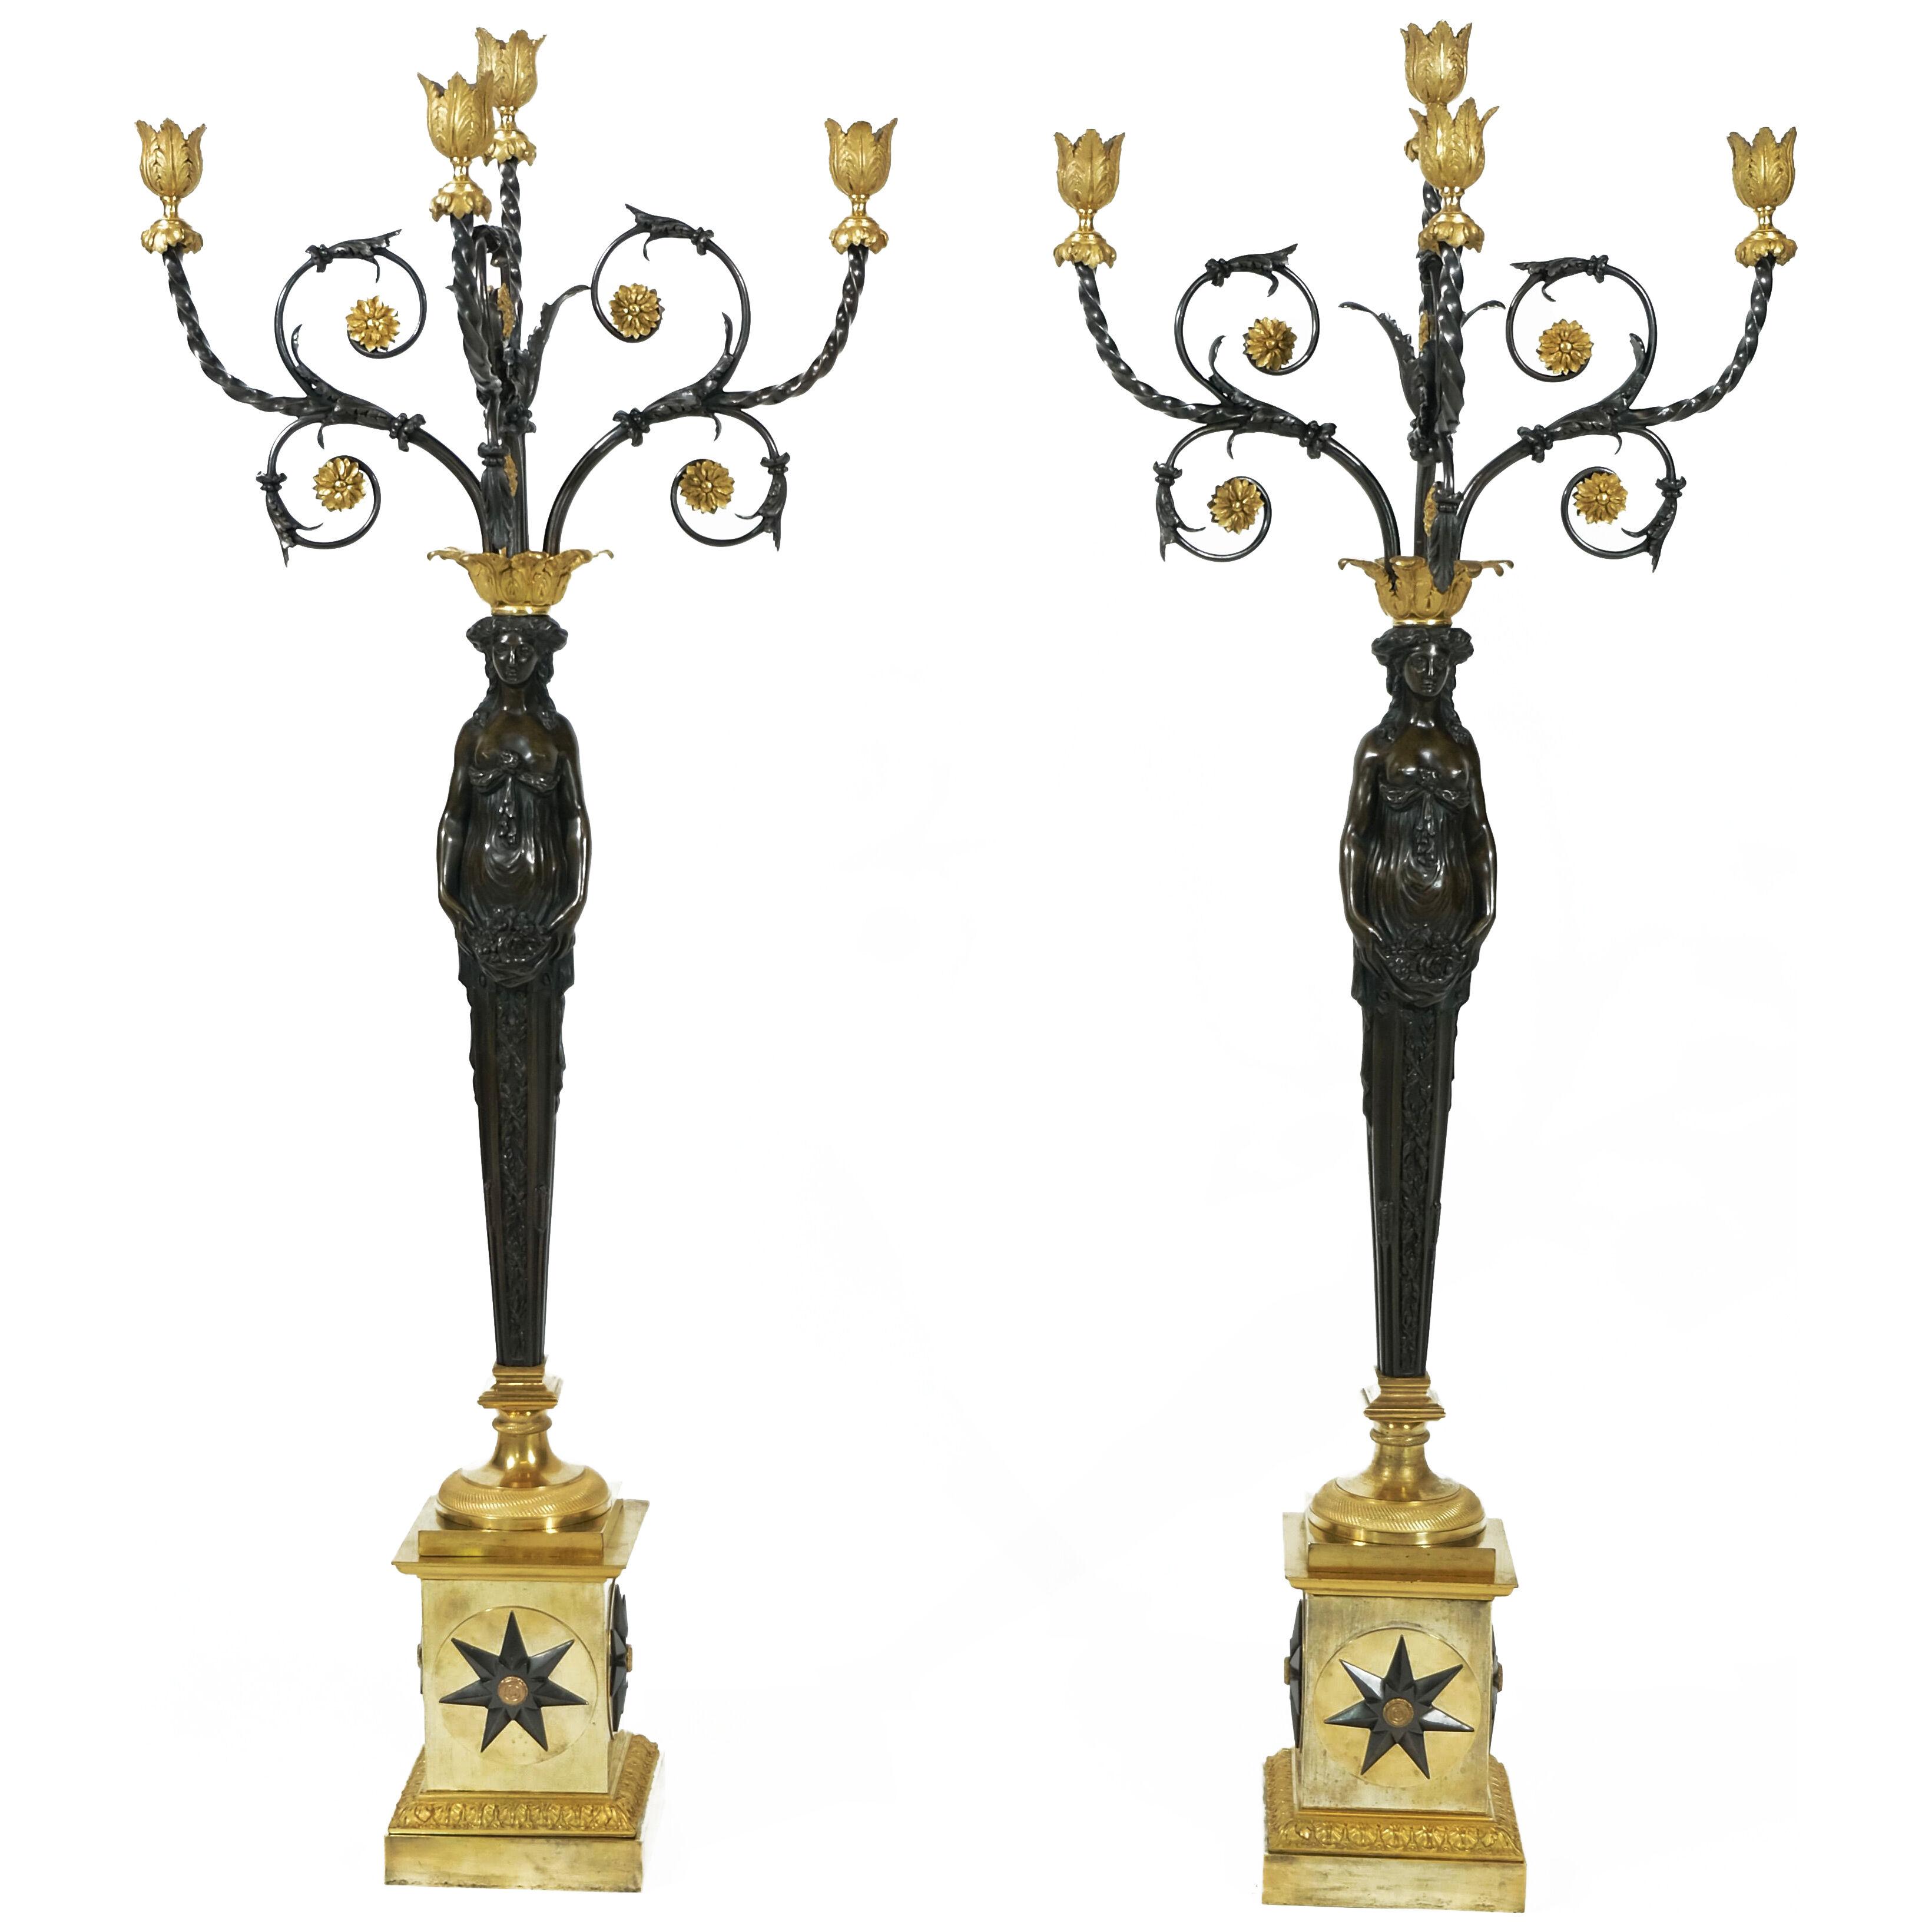 A pair of very large Empire candelabra made ca 1810.